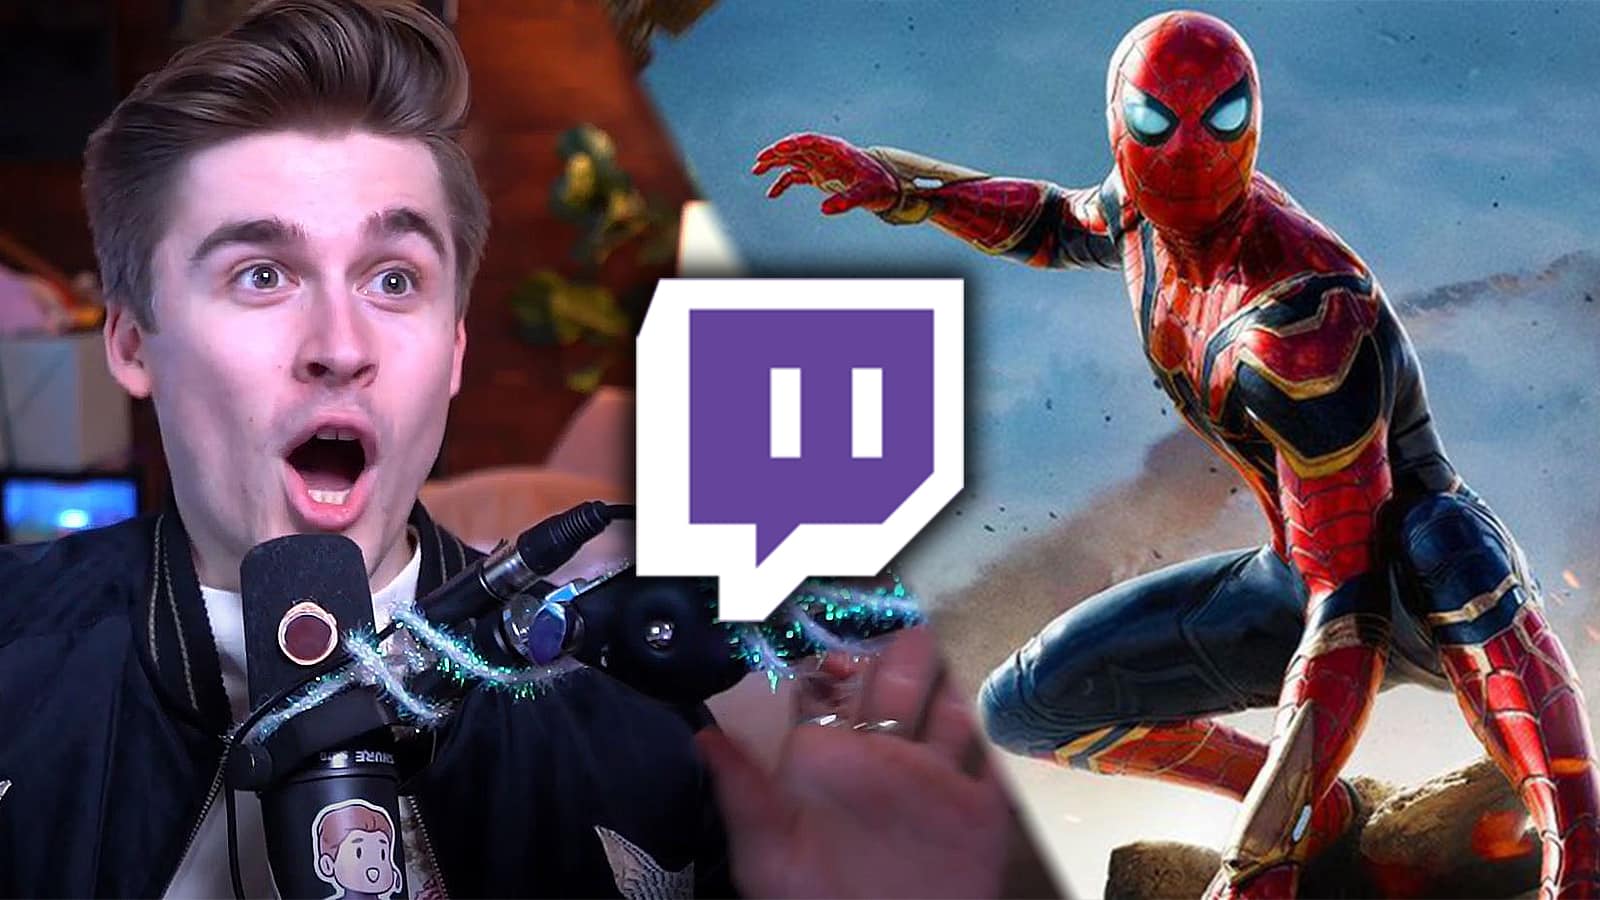 Ludwig shocked after discovering all of Spider-Man No Way Home on Twitch as VOD